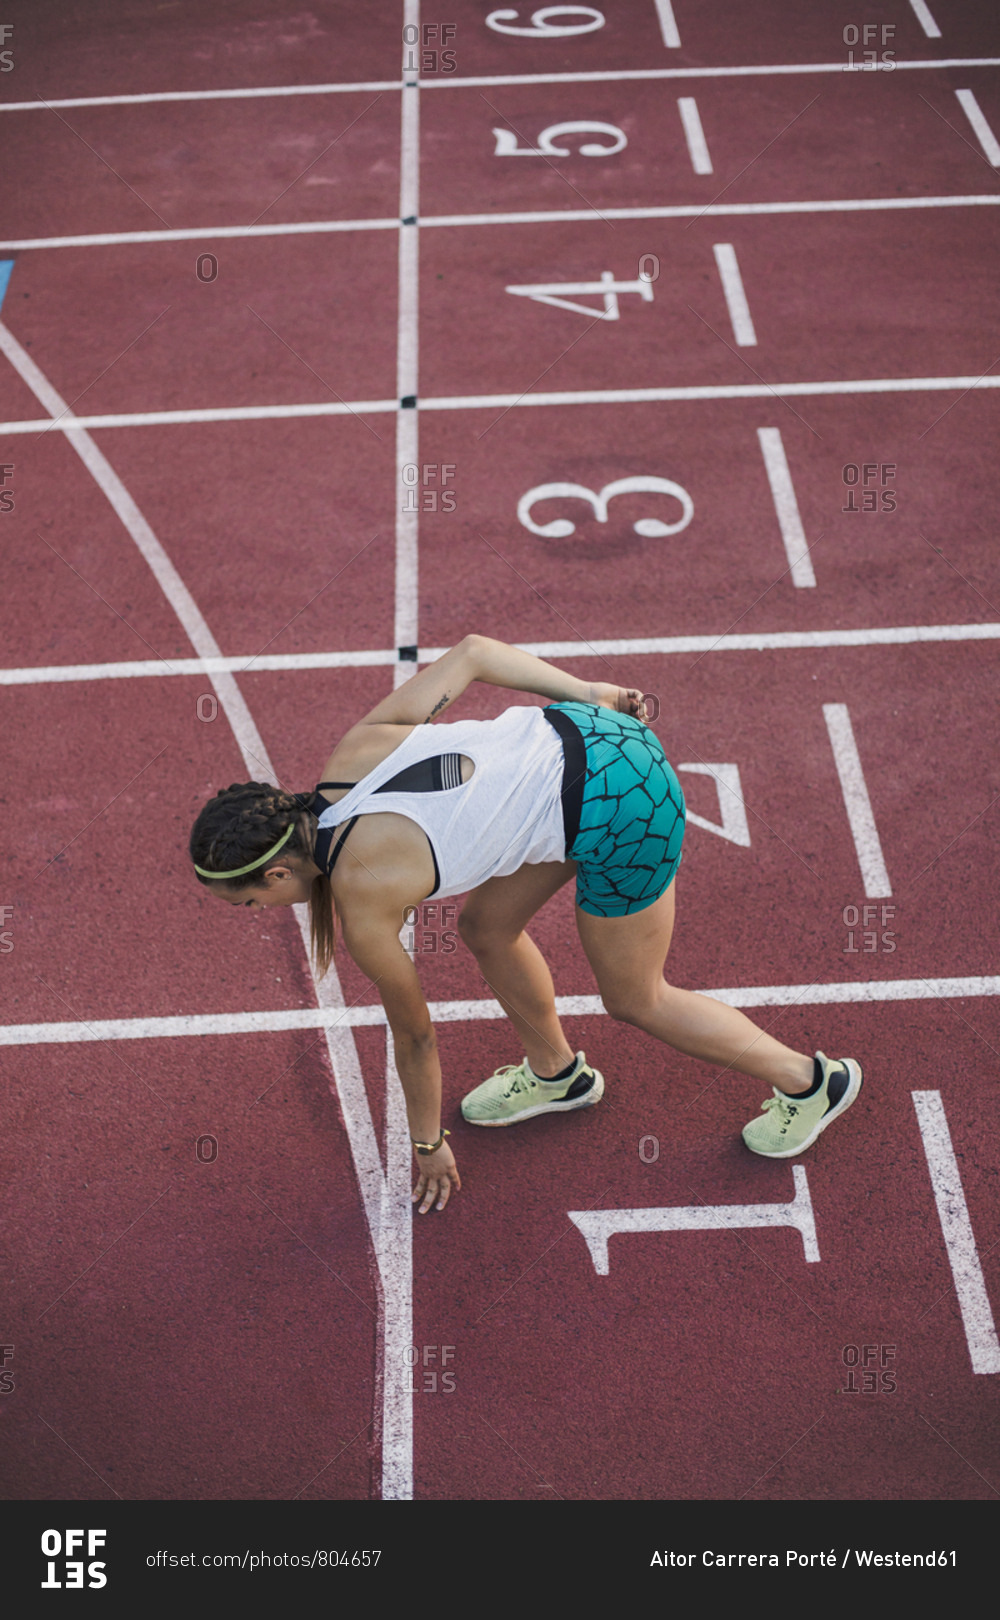 Top view of female runner in starting position on tartan track